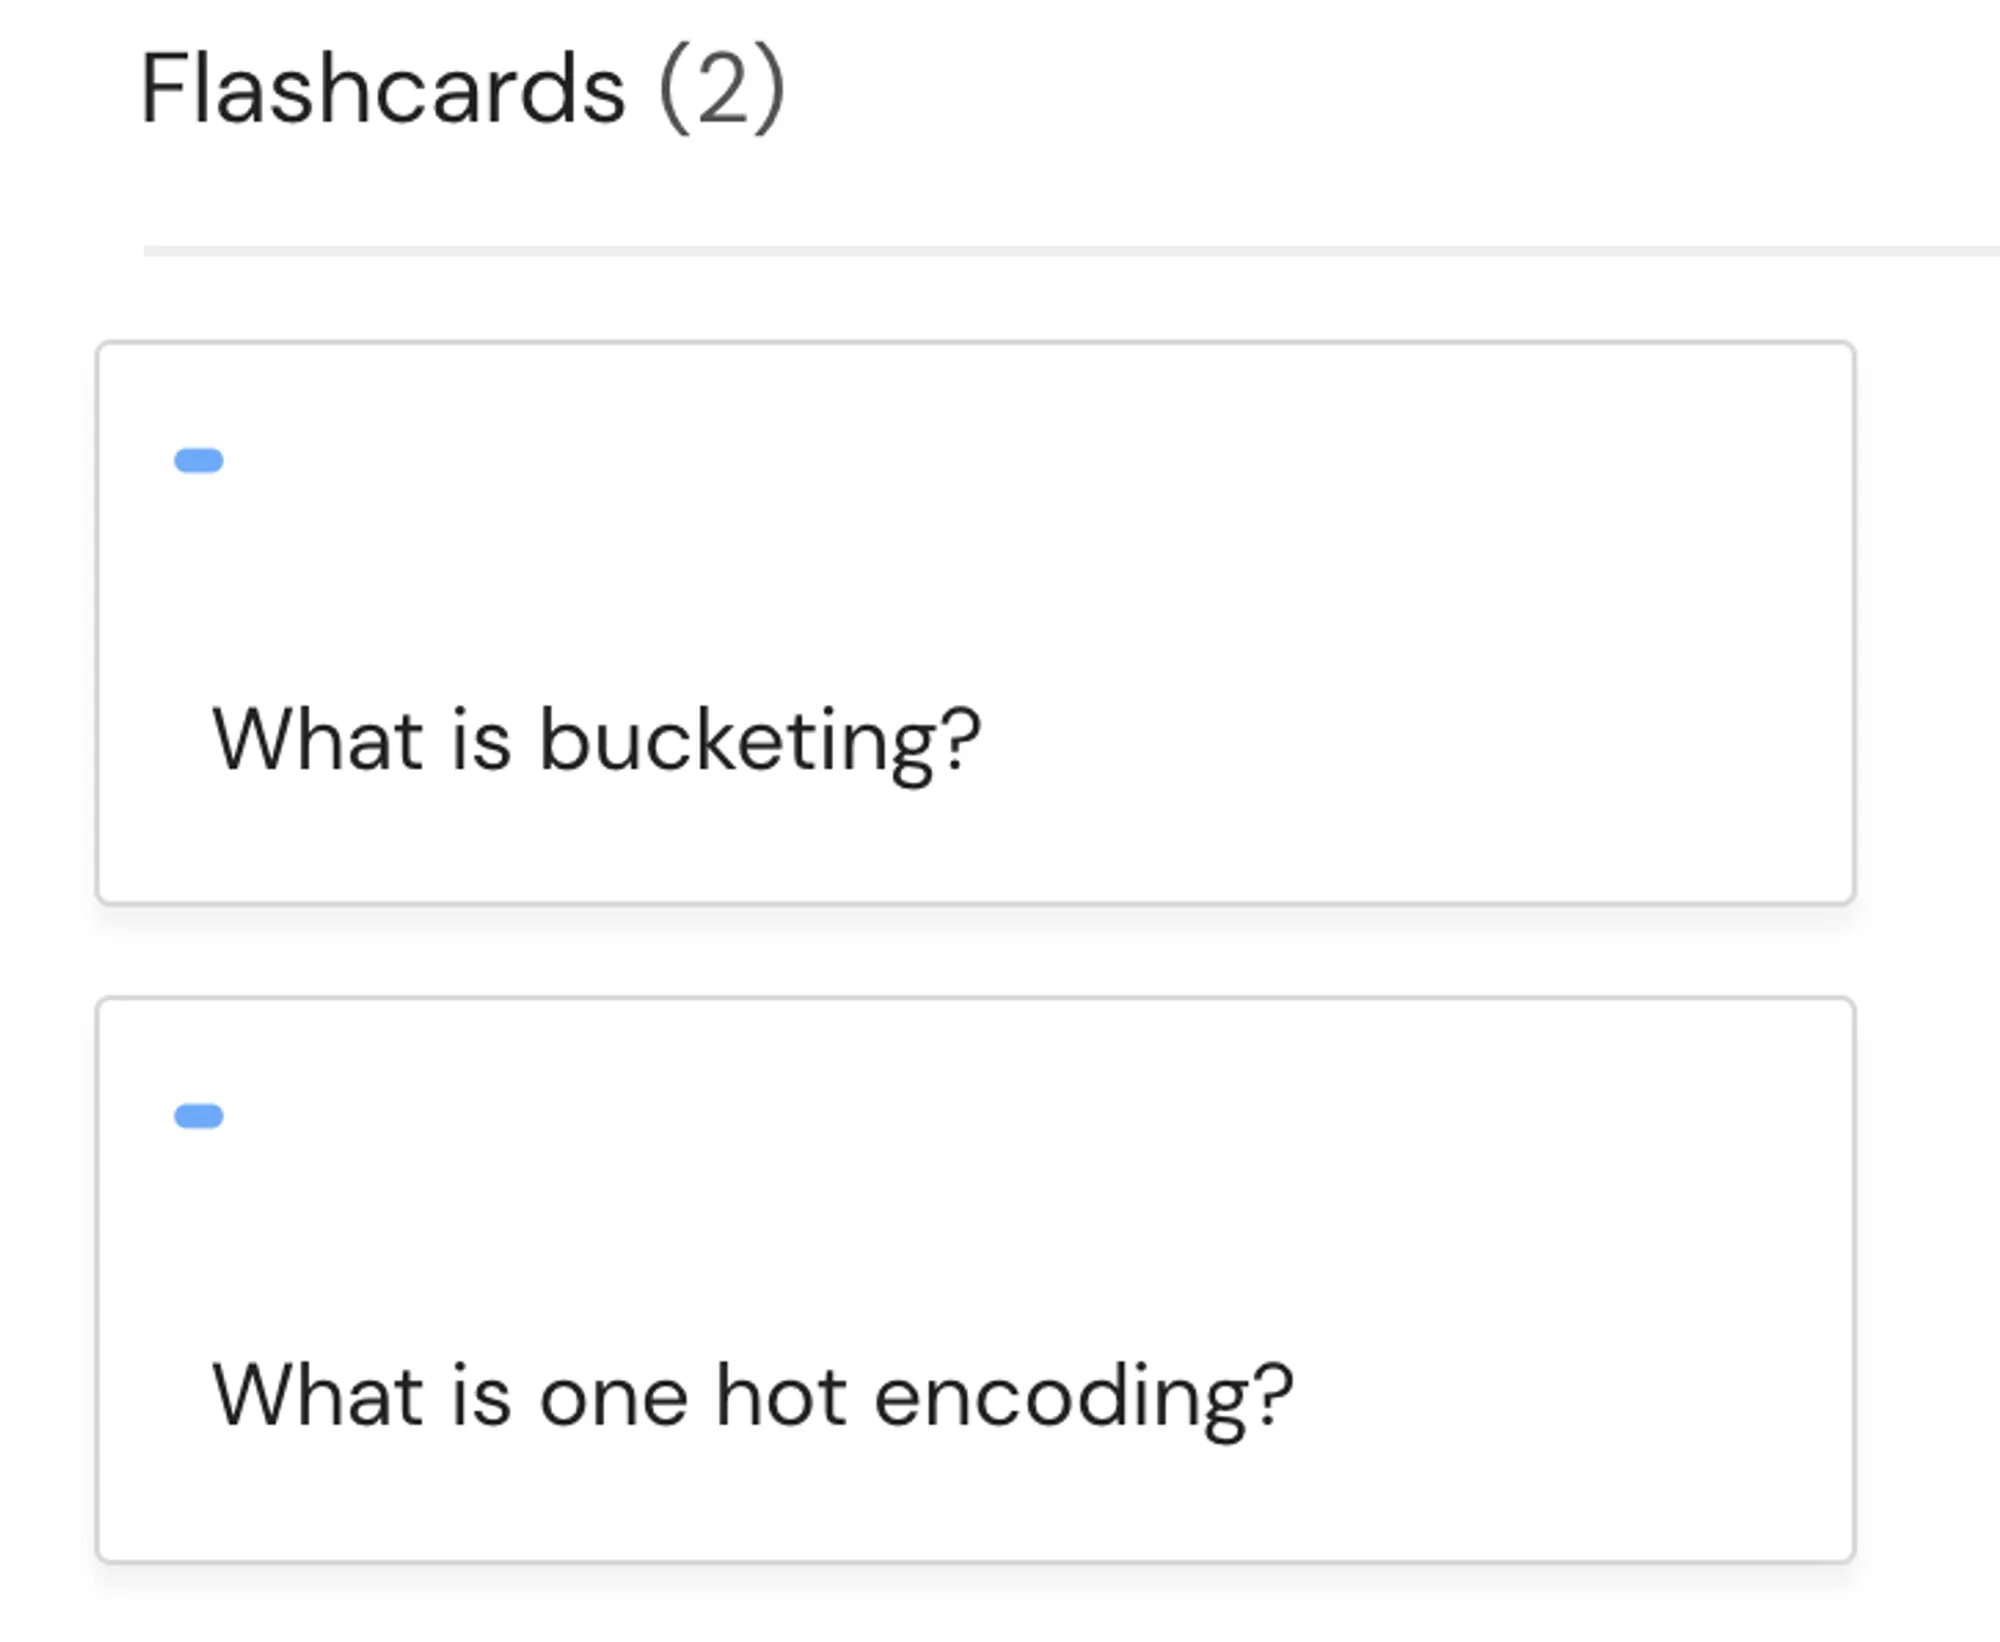 Good flashcards: similar questions prompt similar answers